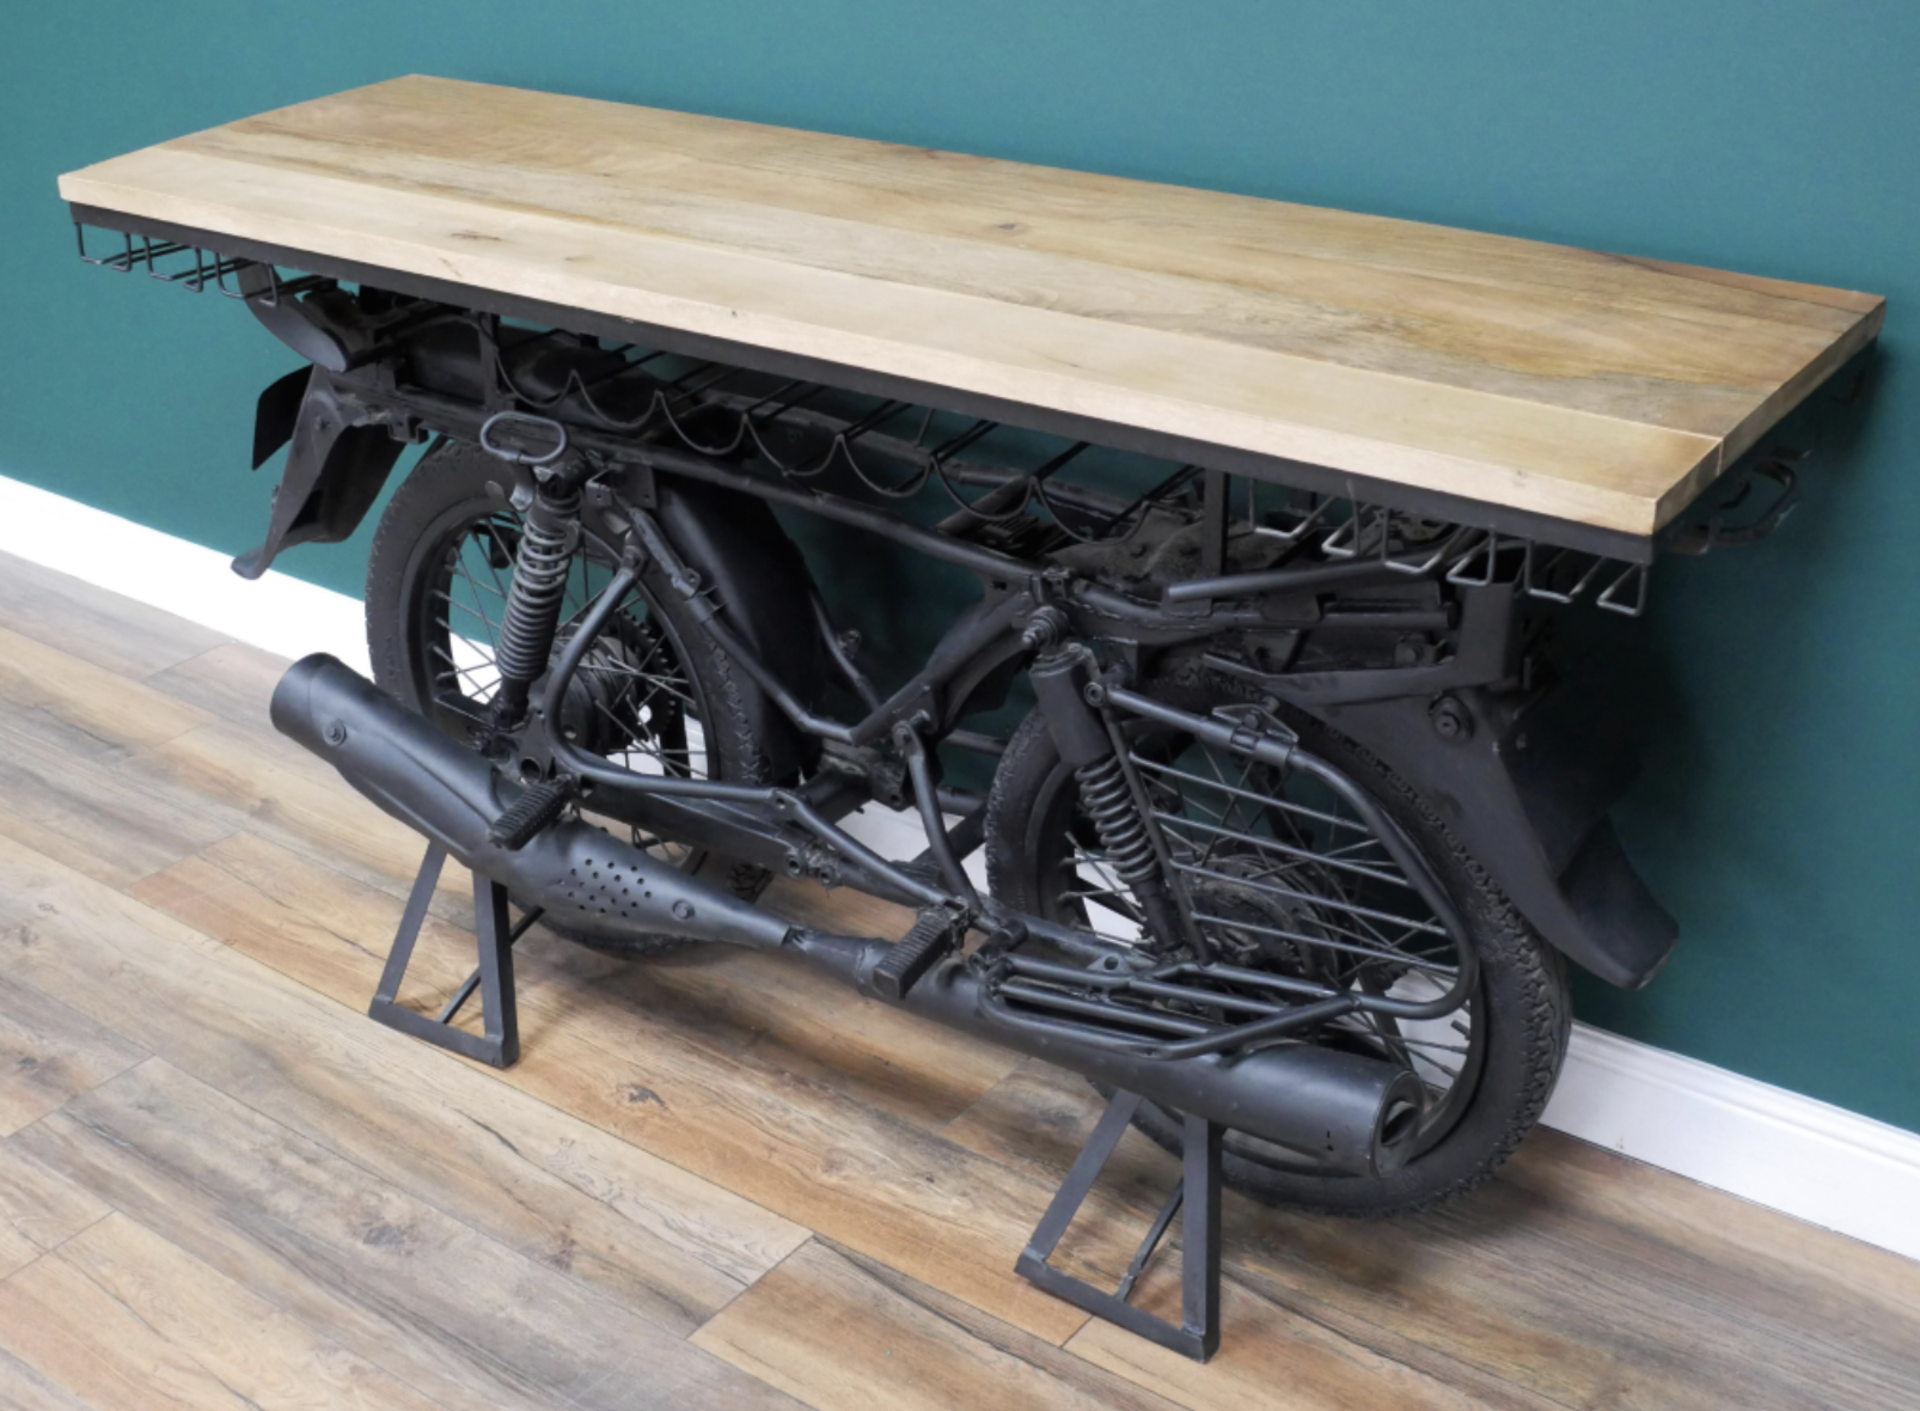 MOTORBIKE THEMED BAR TOP / COUNTER WITH WINE RACK AND GLASS HANGERS *PLUS VAT* - Image 3 of 11